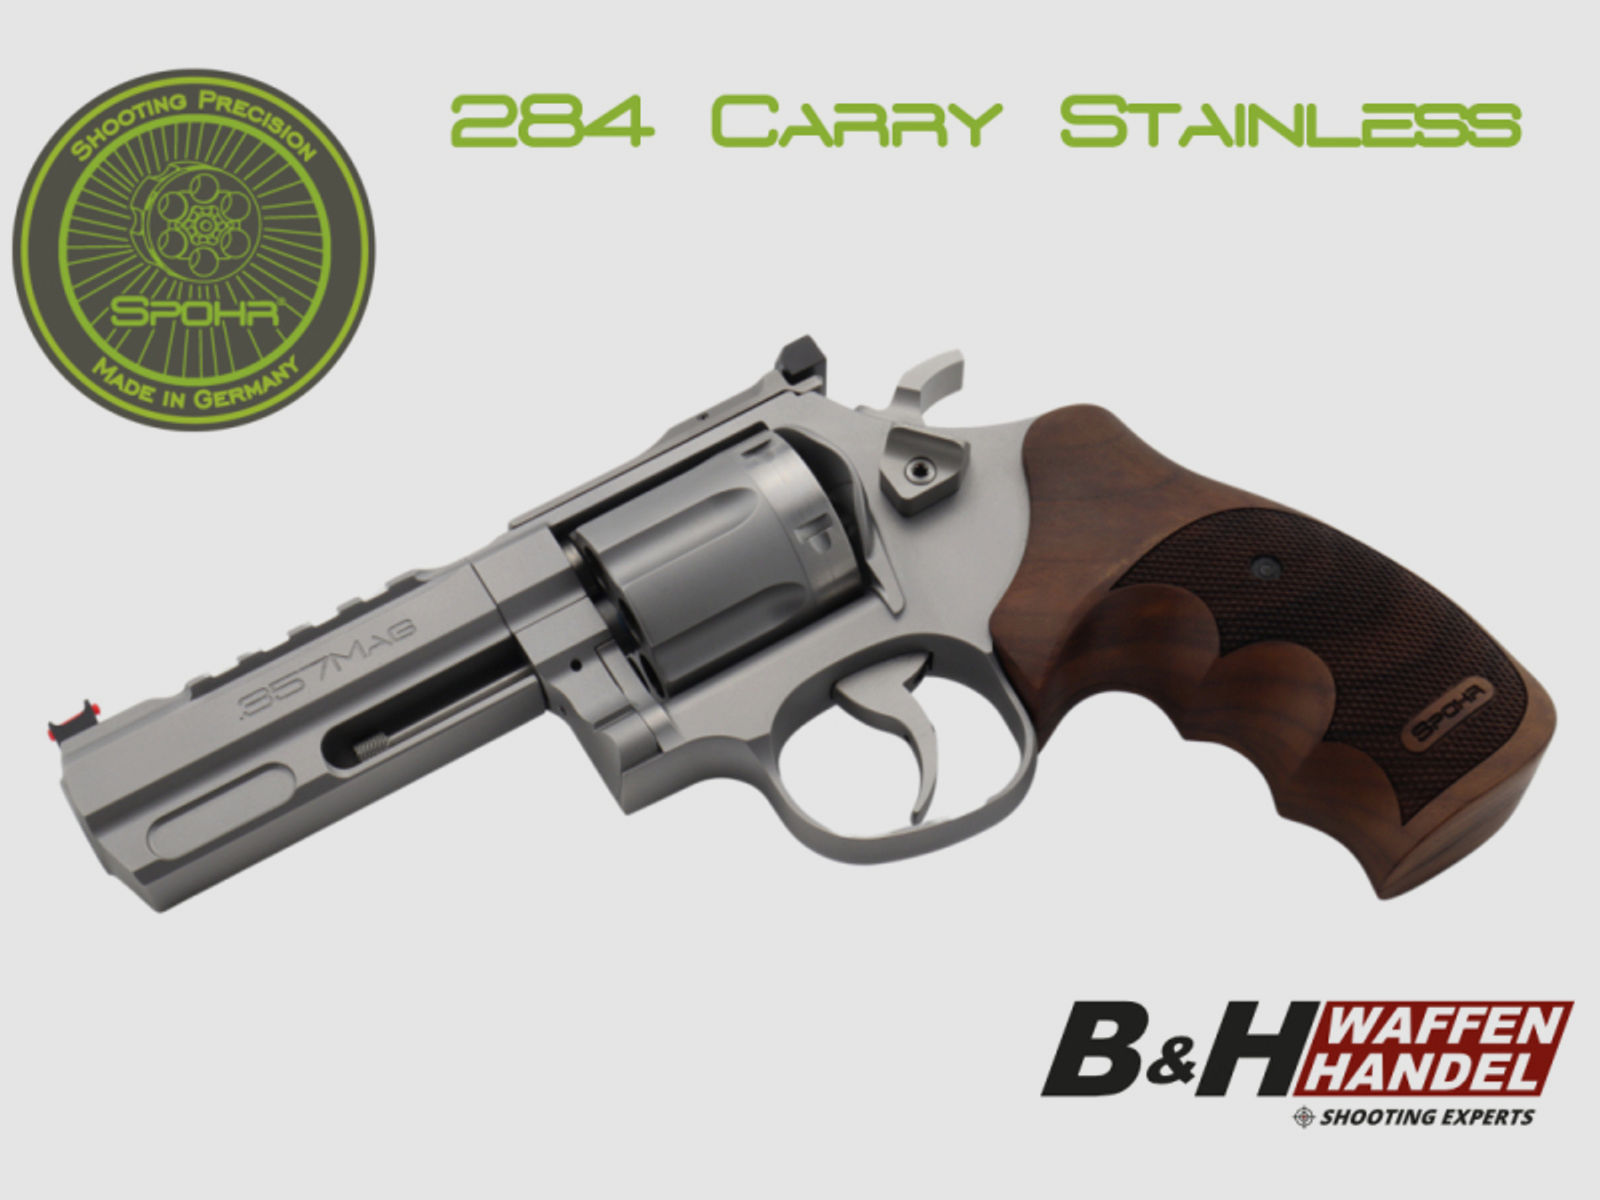 Neuwaffe: SPOHR 284 Carry Stainless 4" Revolver .357 Magnum Made in Germany Sport & Jagd